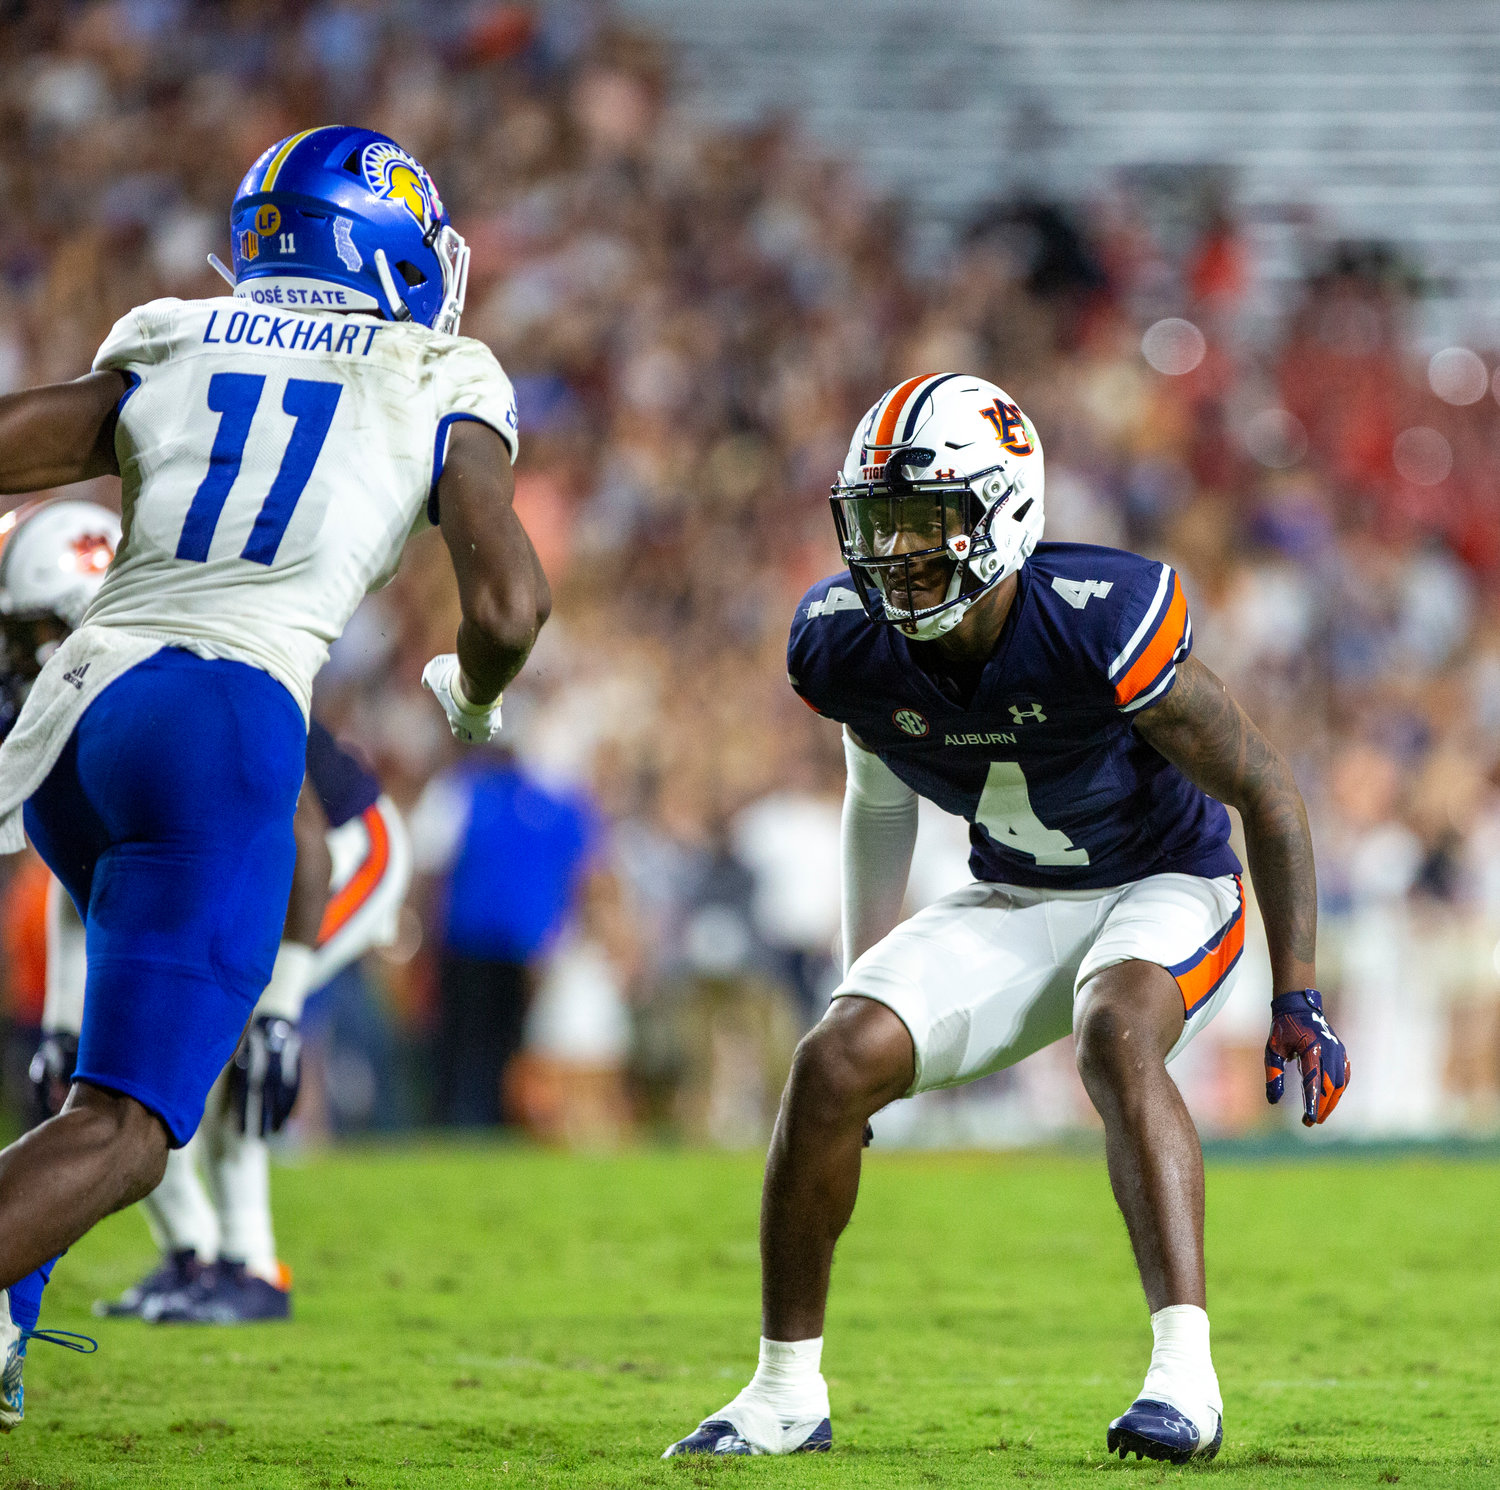 Auburn cornerback DJ James follows the release of San Jose State’s Justin Lockhart during the Tigers’ home opener against the Spartans Sept. 10 at Jordan-Hare Stadium in Auburn. James was one of three Tigers named all-conference after he racked up a career-high 8 pass breakups this season.